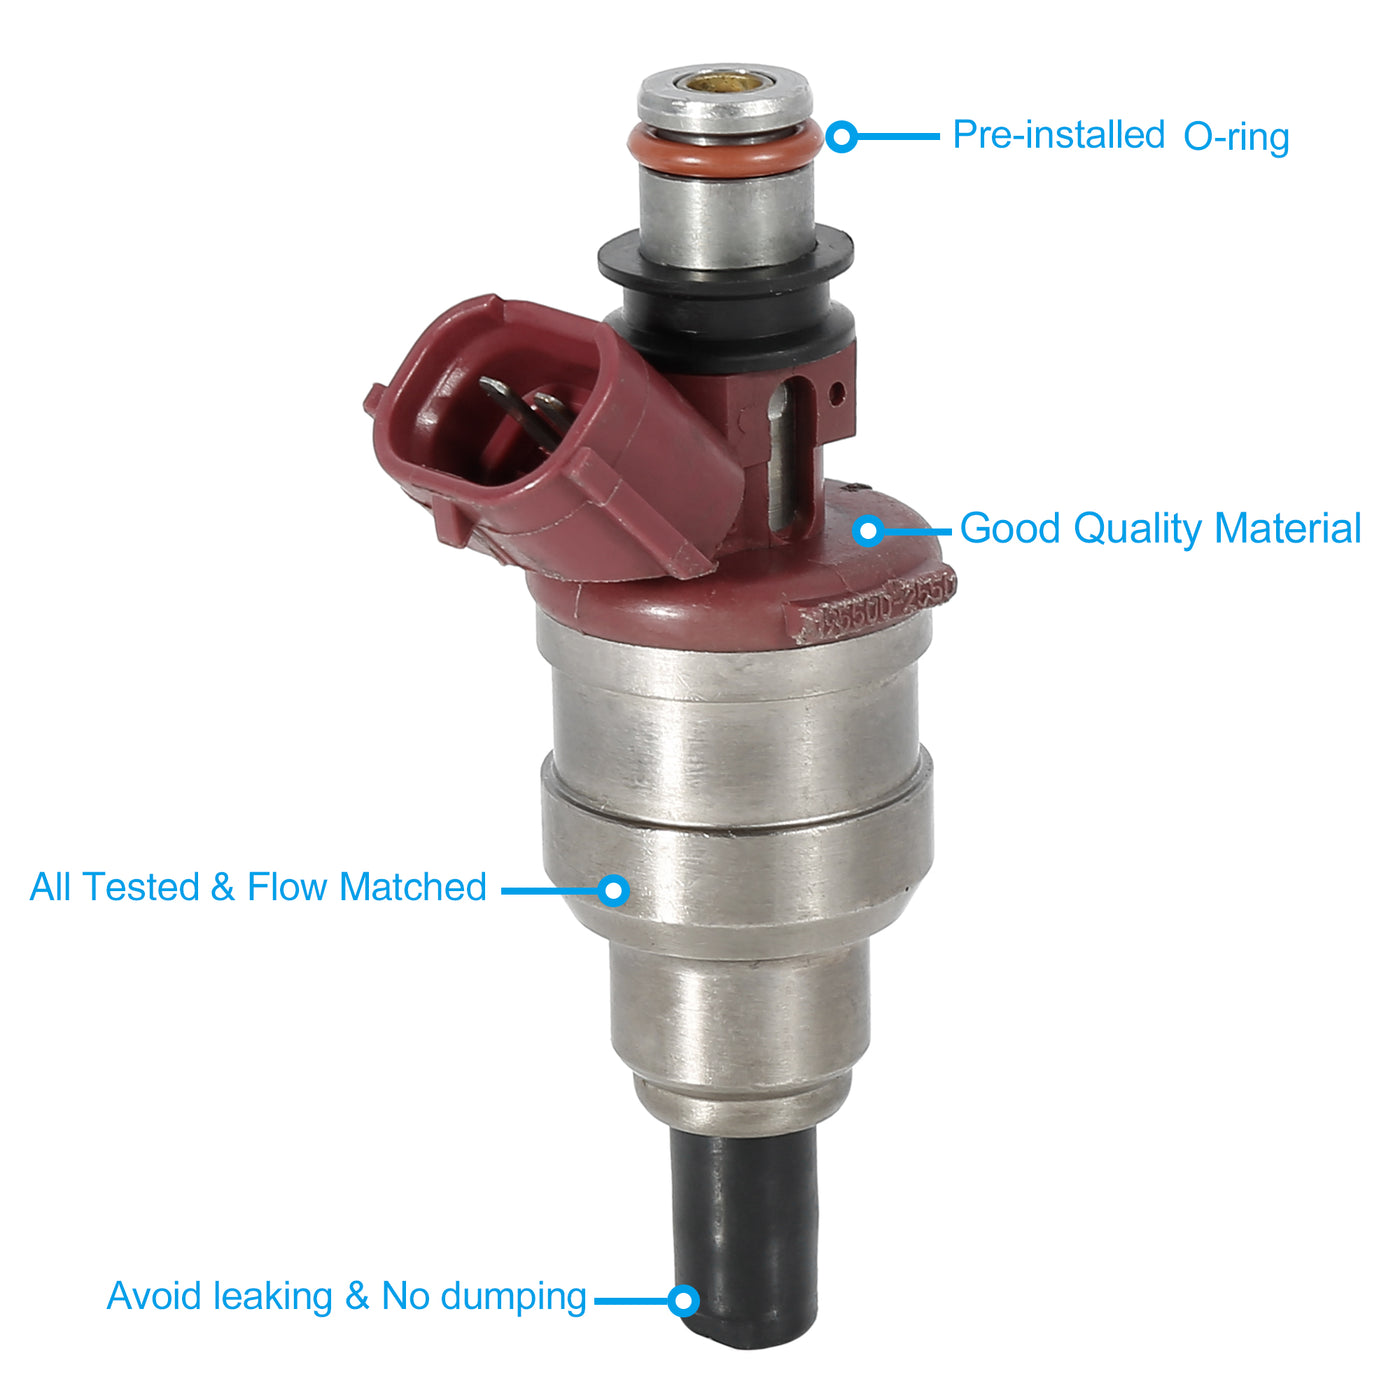 X AUTOHAUX 195500-2550 Automobile Fuel Injector Replacement for Daihatsu Silver Tone Red